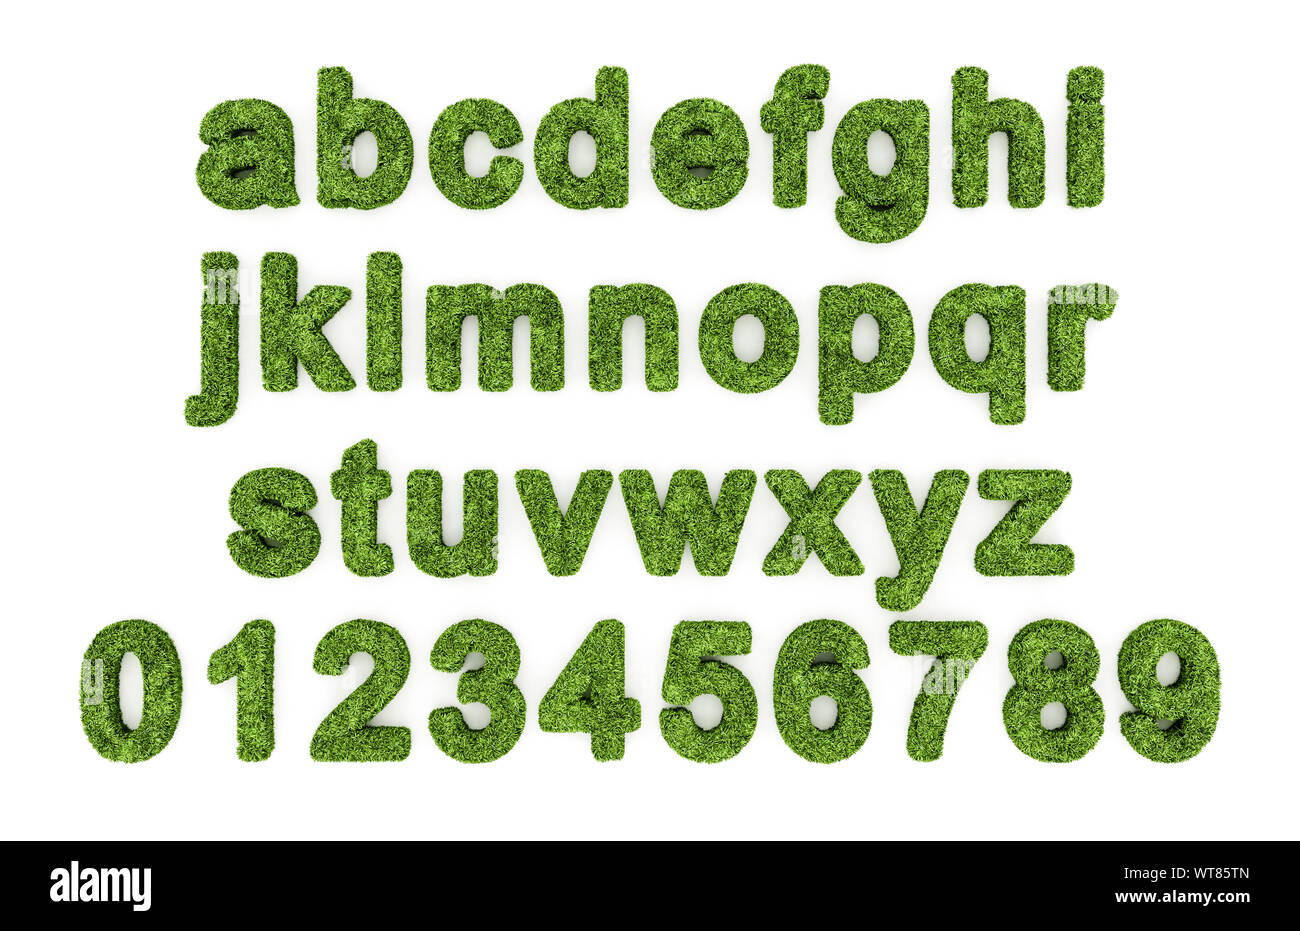 Grass alphabet, letters and numbers, lower case Stock Photo